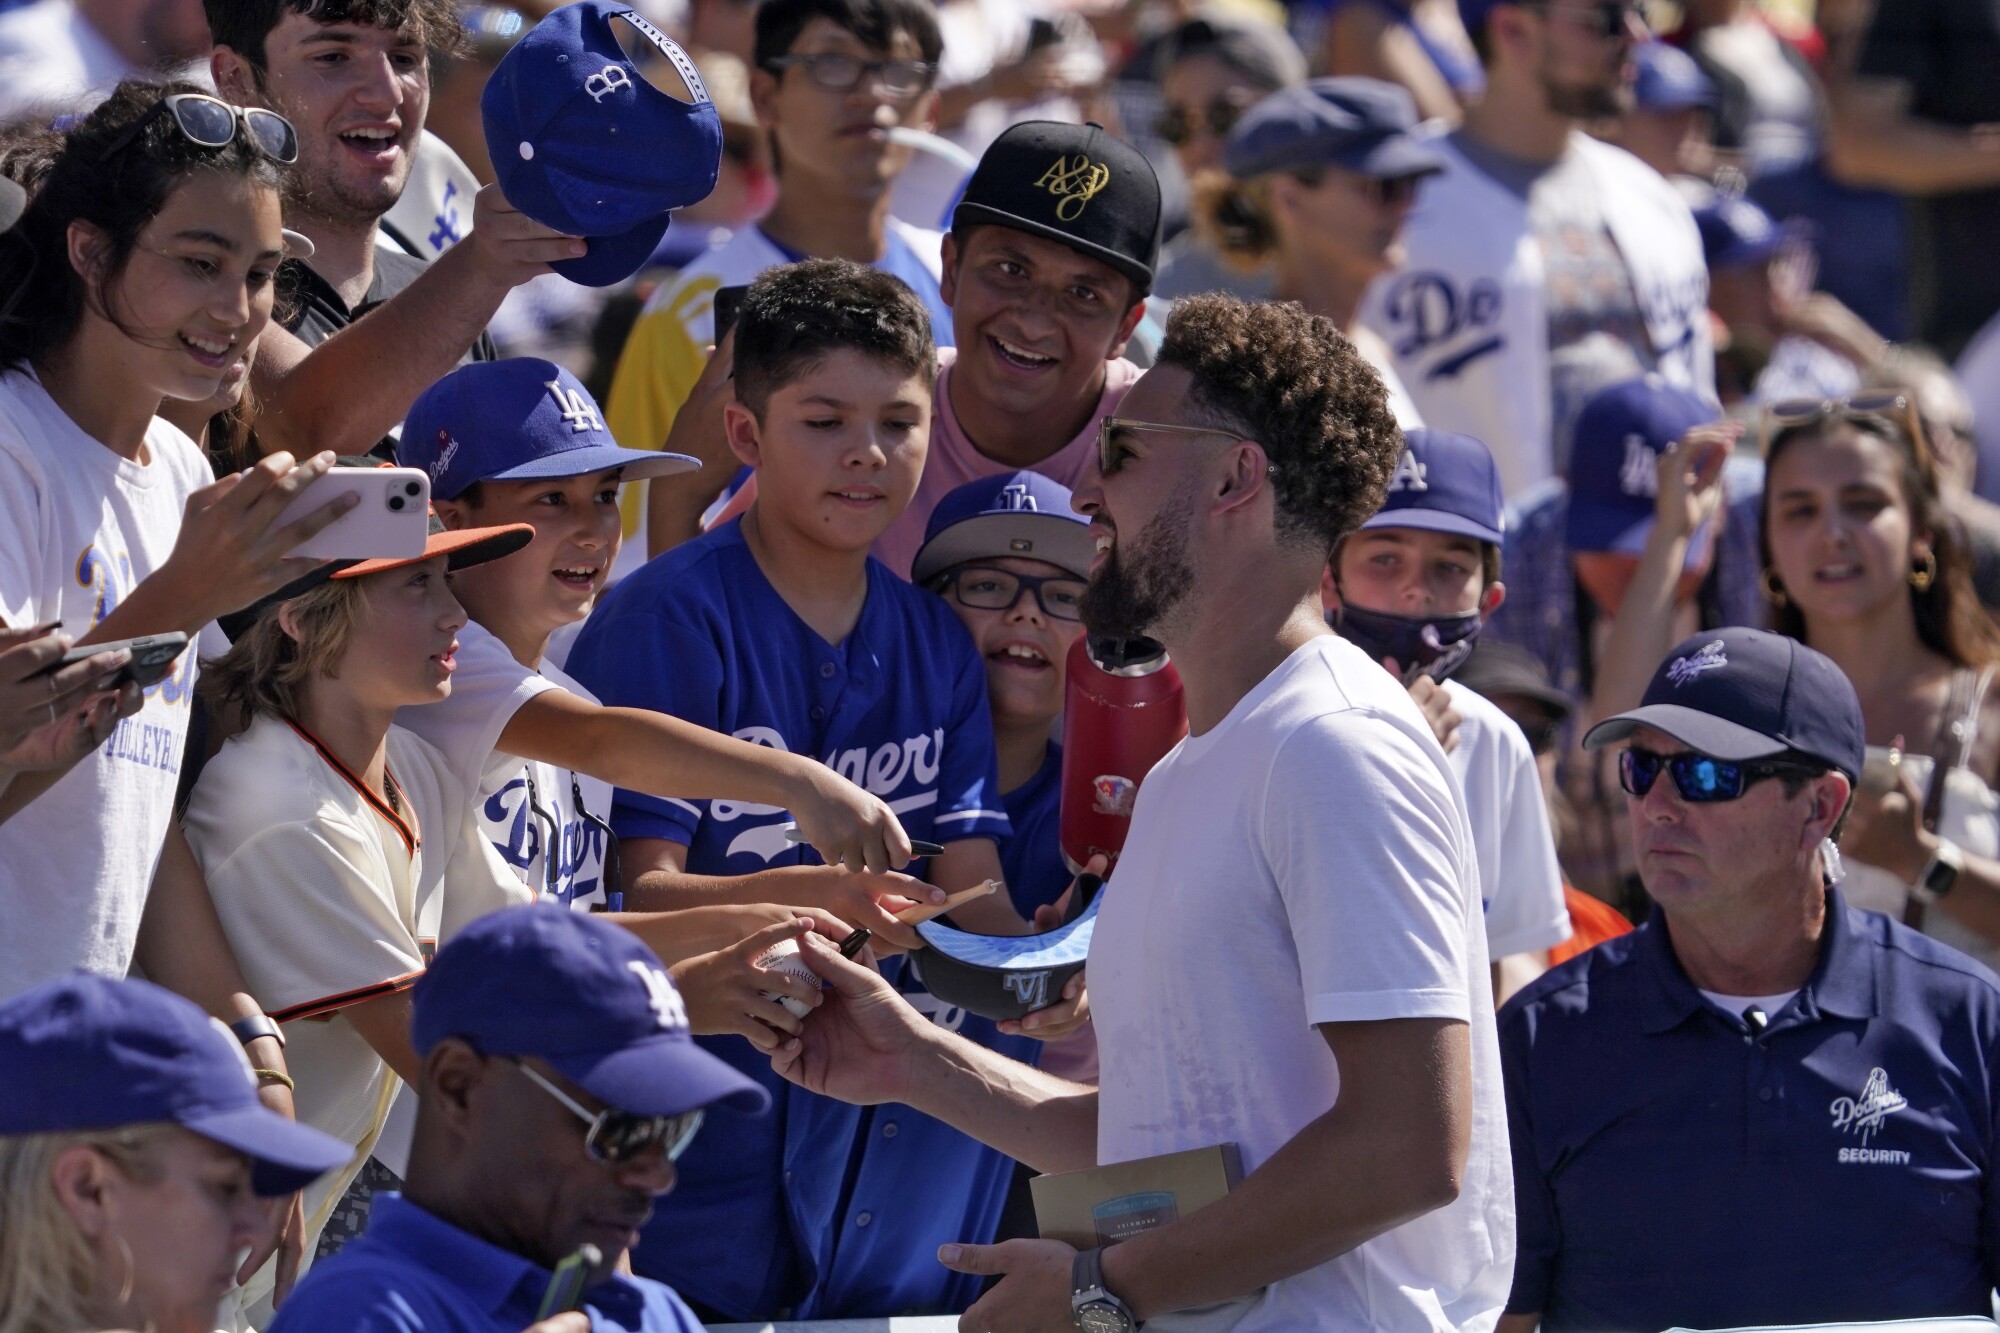 Golden State Warriors star Klay Thompson signs autographs for fans while watching the Dodgers play the San Francisco Giants